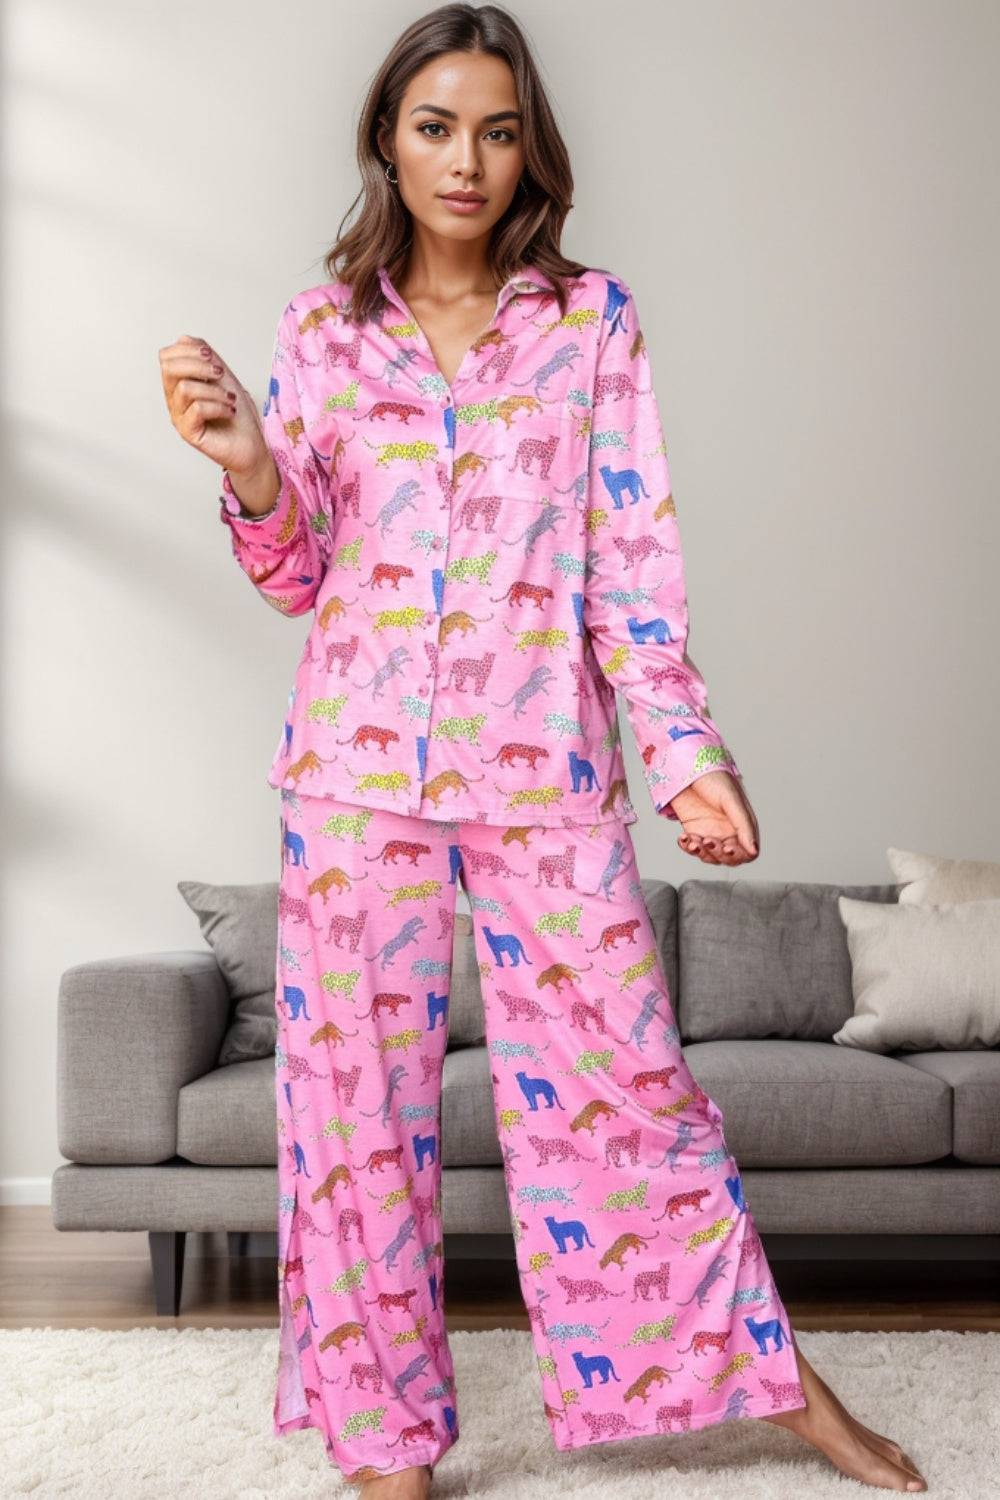 a woman in pink pajamas standing in front of a couch